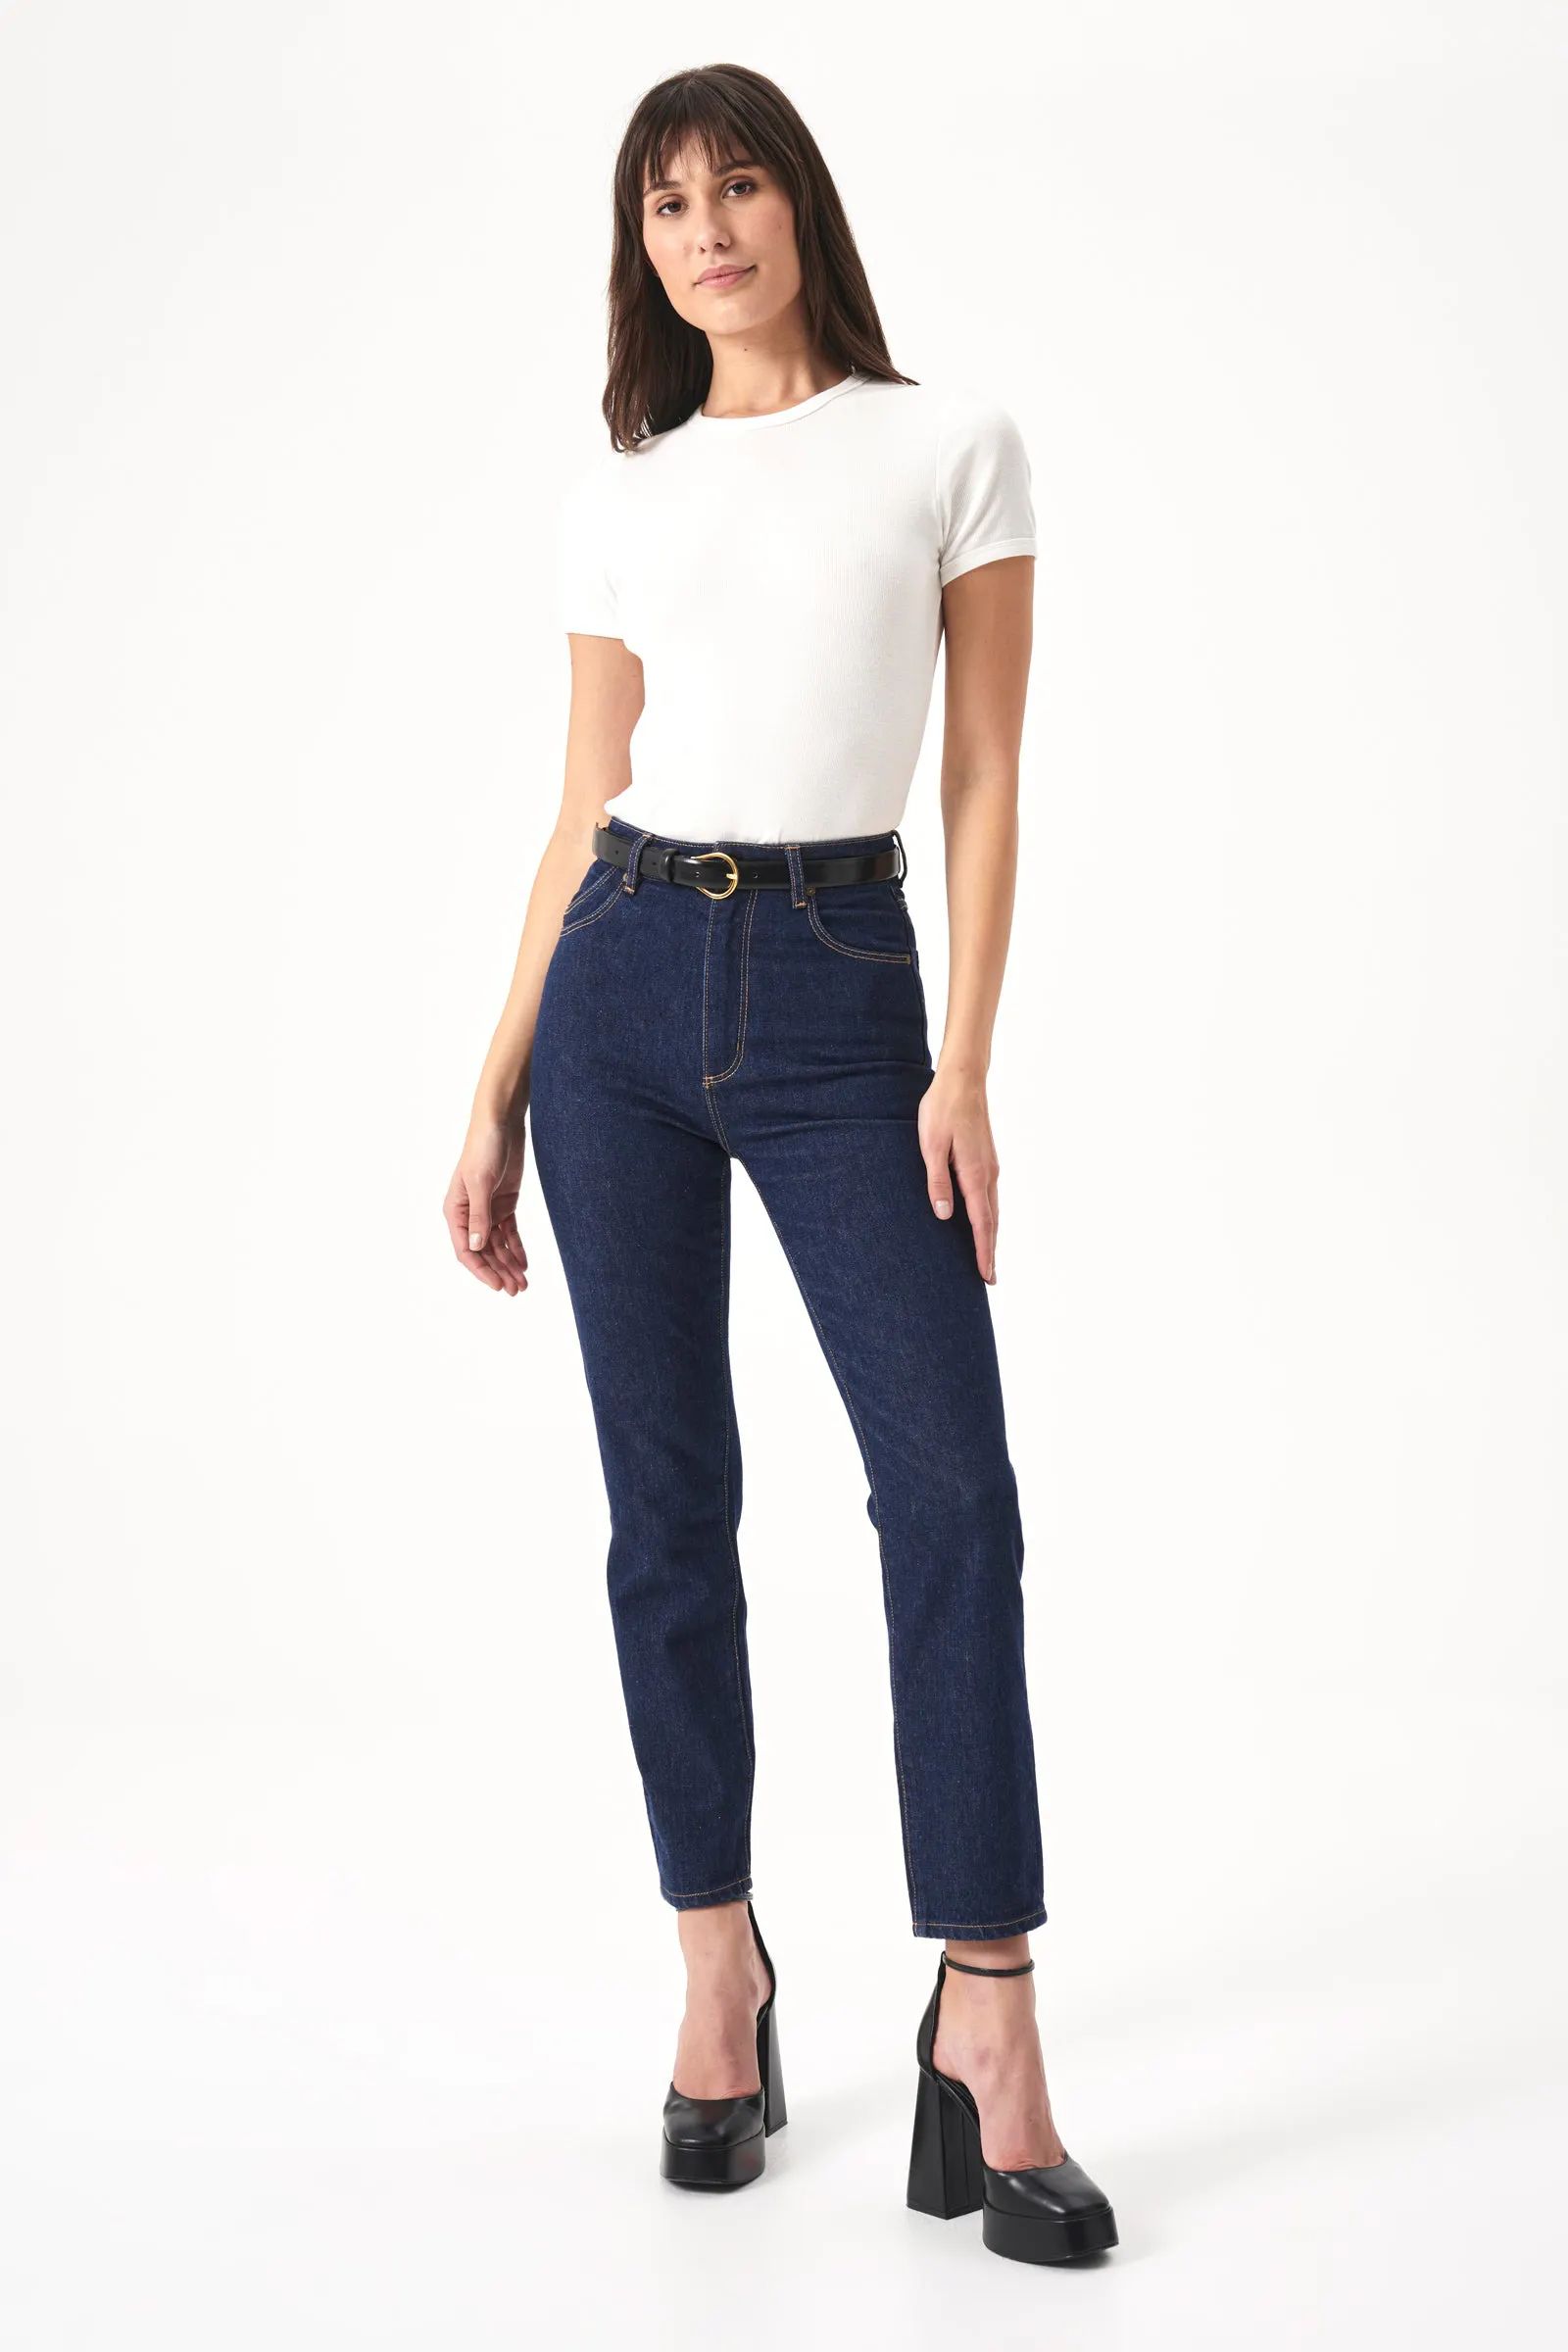 Buy Dusters - Comfort Rinse Blue Online | Rollas Jeans | Rolla's Jeans US/CAN